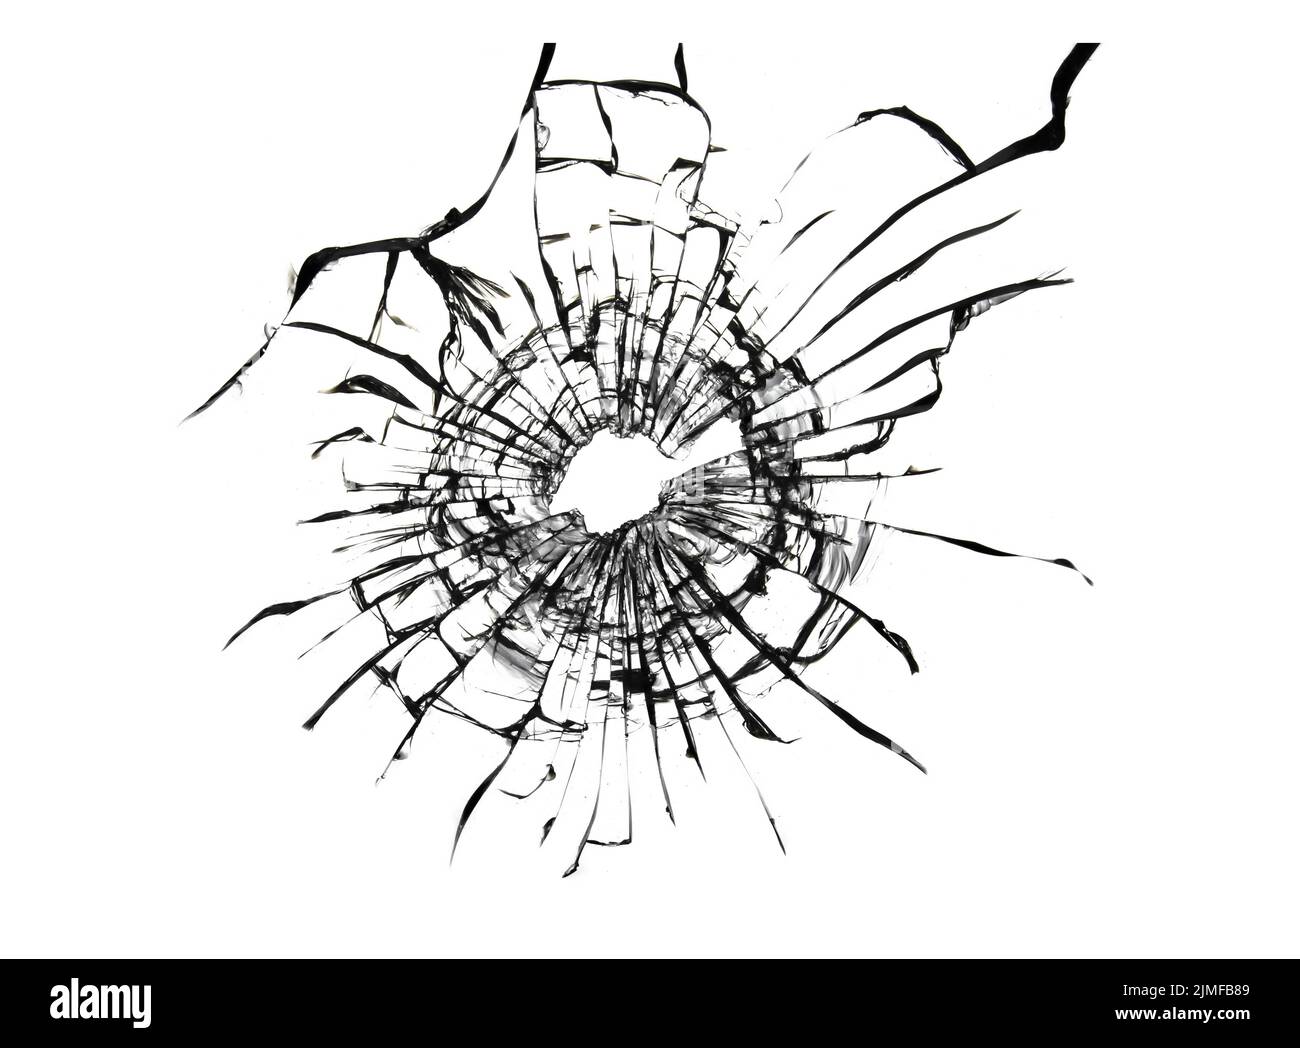 Broken window, background of cracked glass. Abstract texture on white background Stock Photo